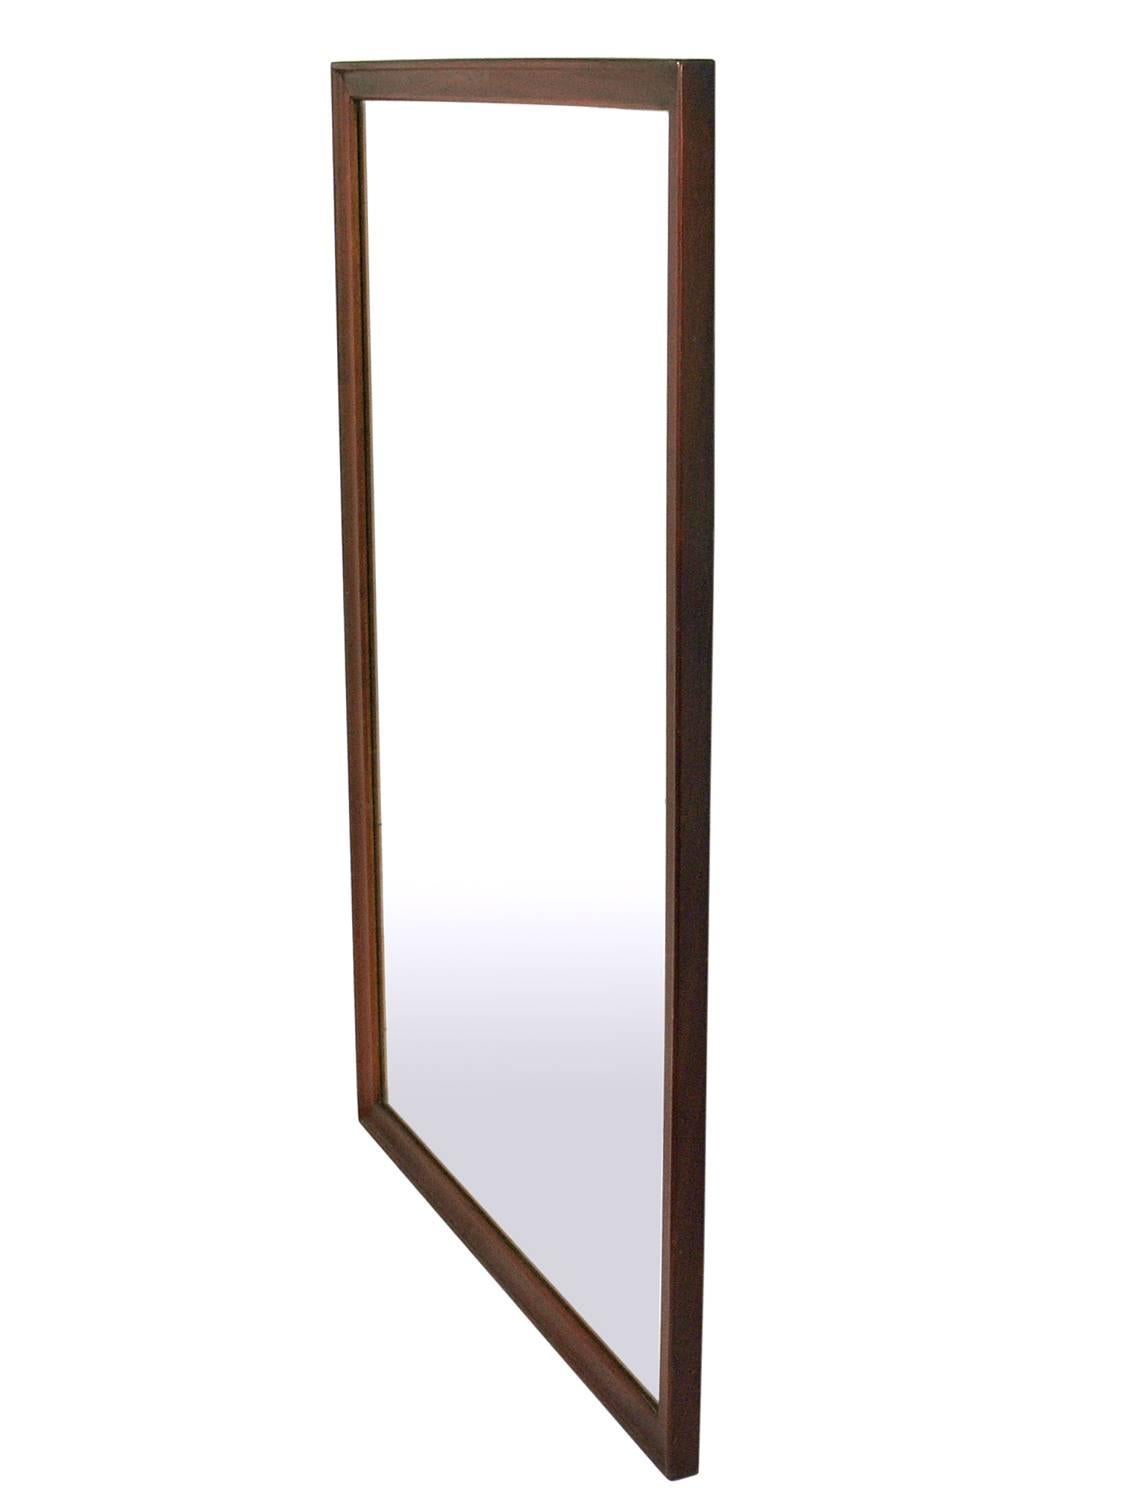 Clean lined walnut mirror by Kipp Stewart for Drexel, American, circa 1950s. Retains it's warm original patina. Has been cleaned and Danish oiled. Can be hung vertically or horizontally, just let us know which you prefer.